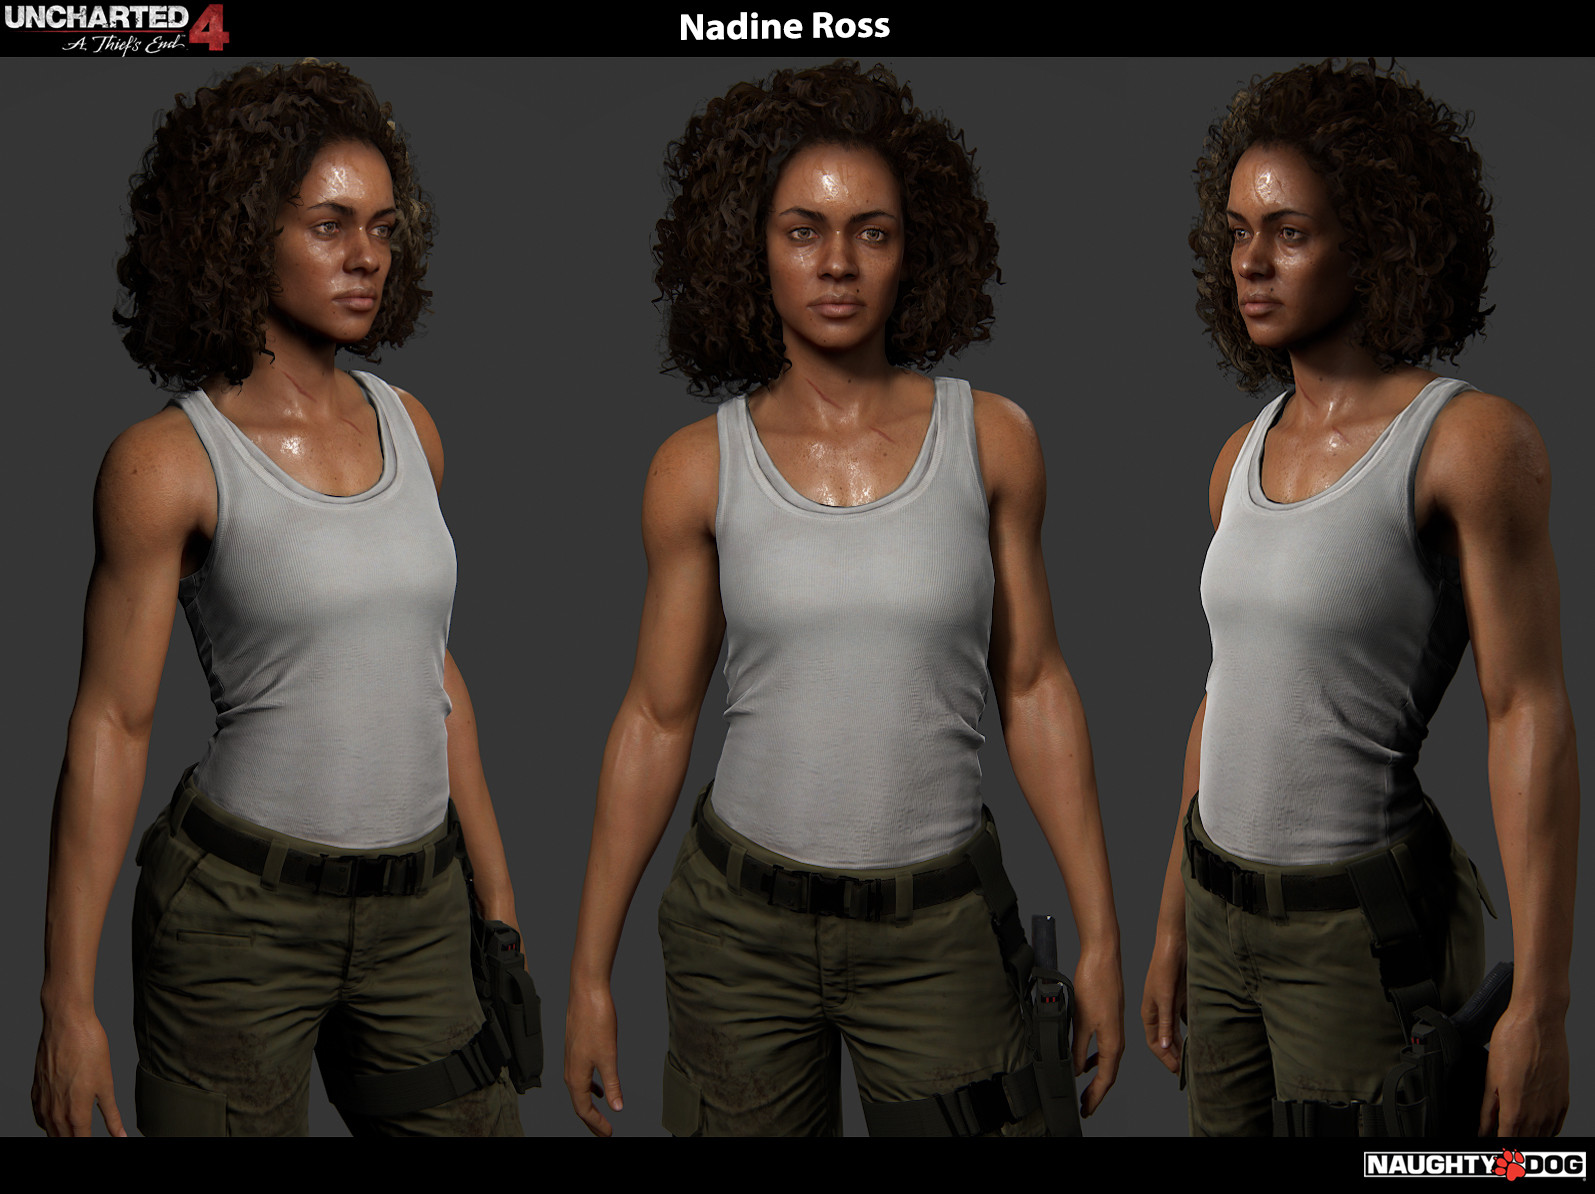 uncharted nadine uncharted nadine ross porn uncharted nadine ross porn uncharted nadine ross